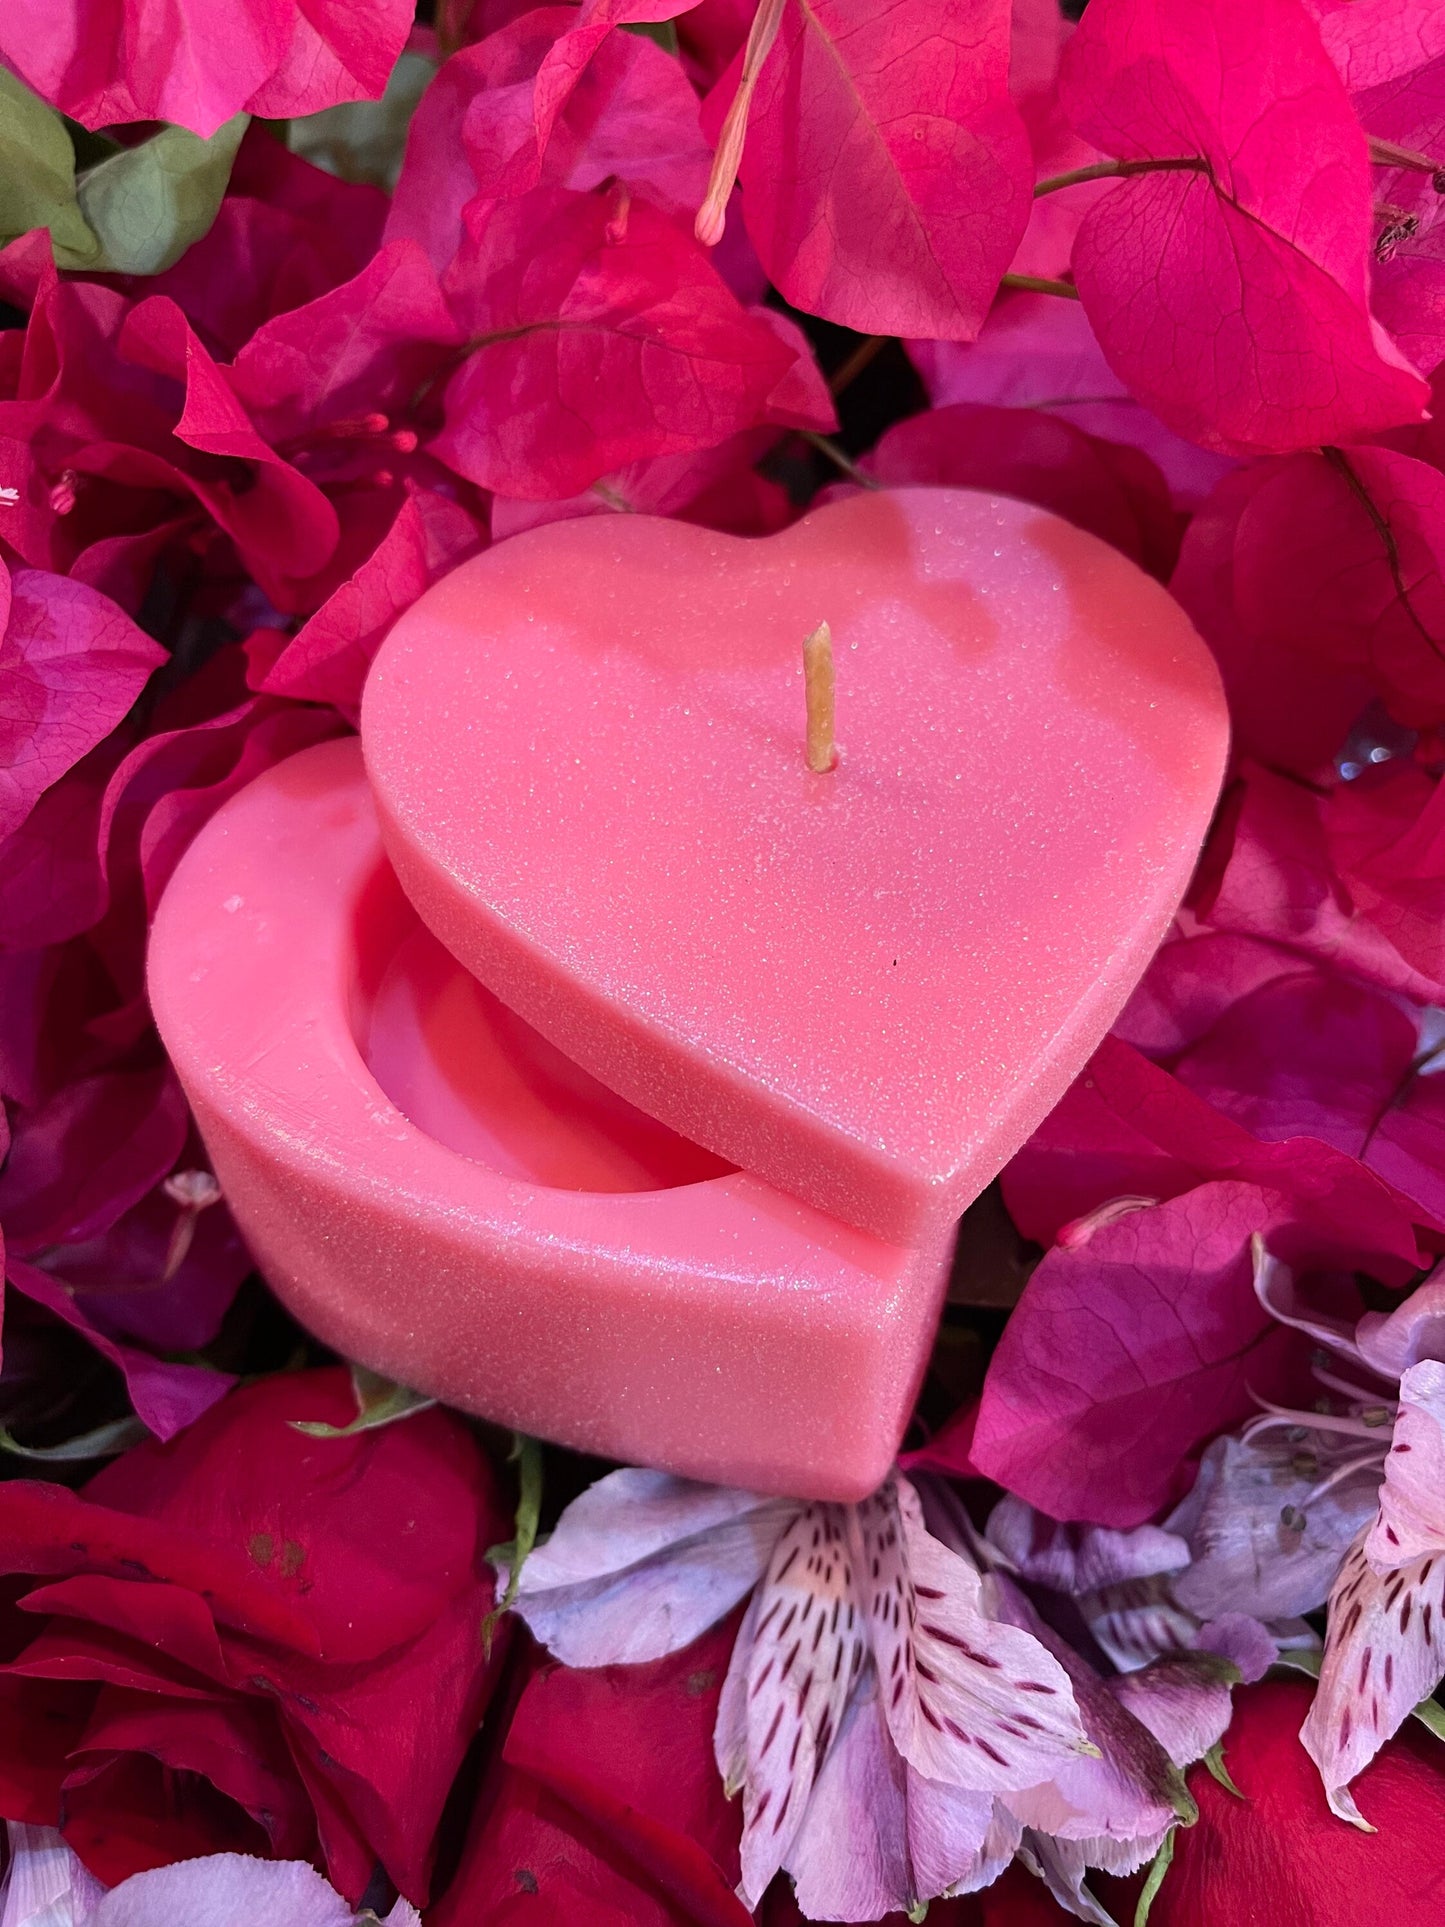 Loadable Heart Candle for Love and Friendship